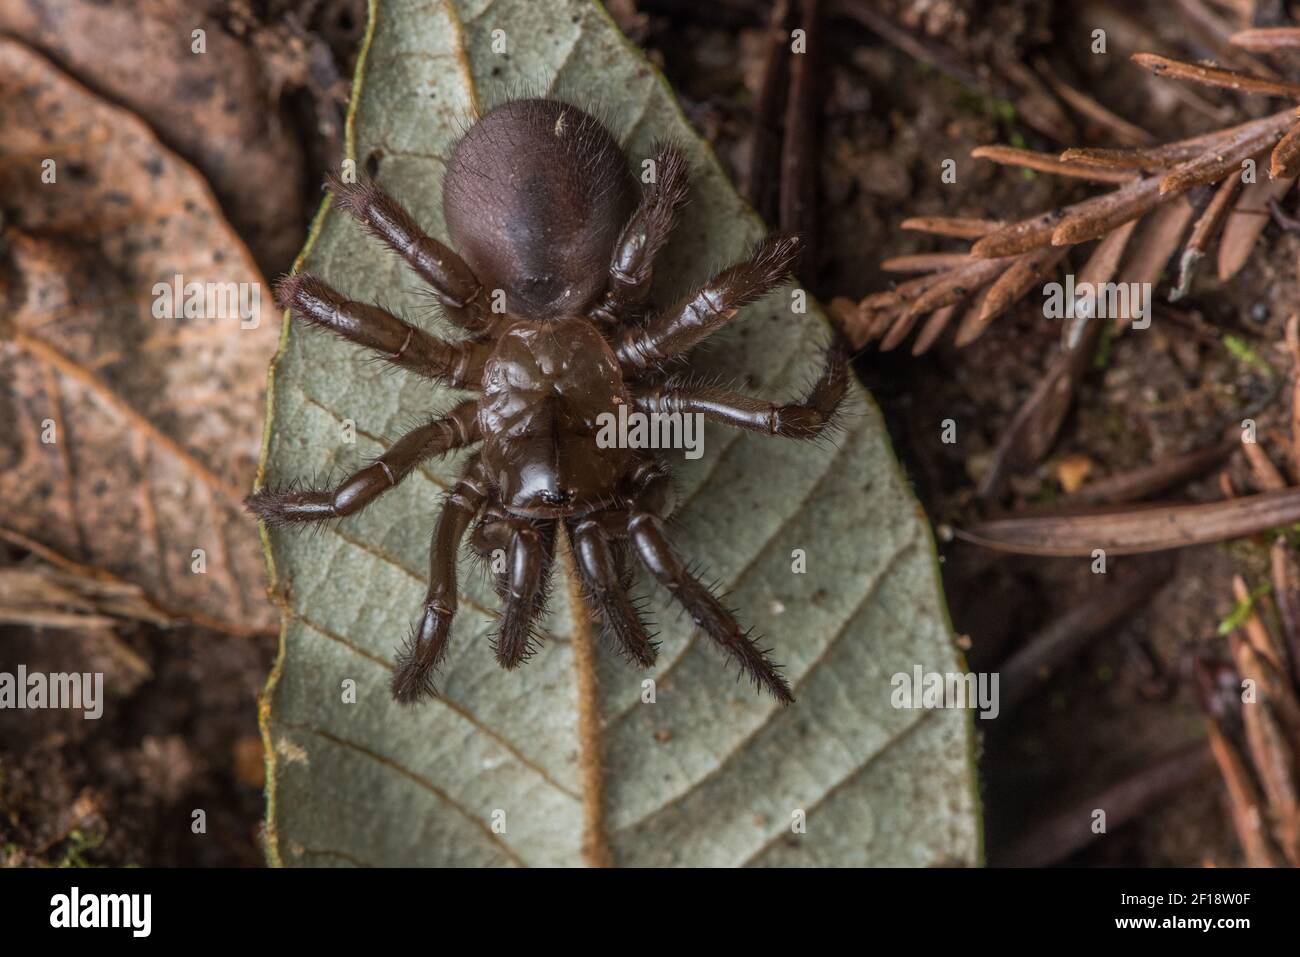 A folding trapdoor spider (Aliatypus californicus), a mygalomorph species endemic to California, found crawling on the forest floor at night. Stock Photo